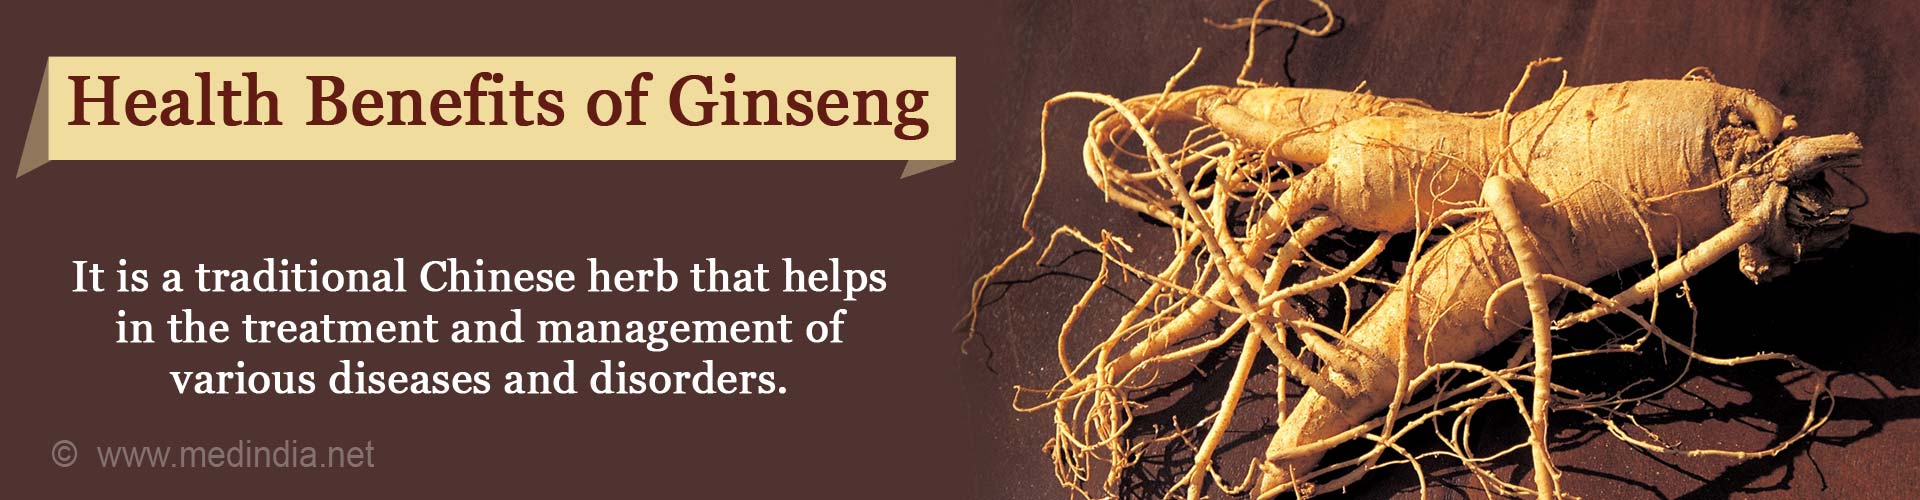 Health Benefits of Ginseng - It is a traditional Chinese herb that helps in the tratment and managment of various diseases and disorders 